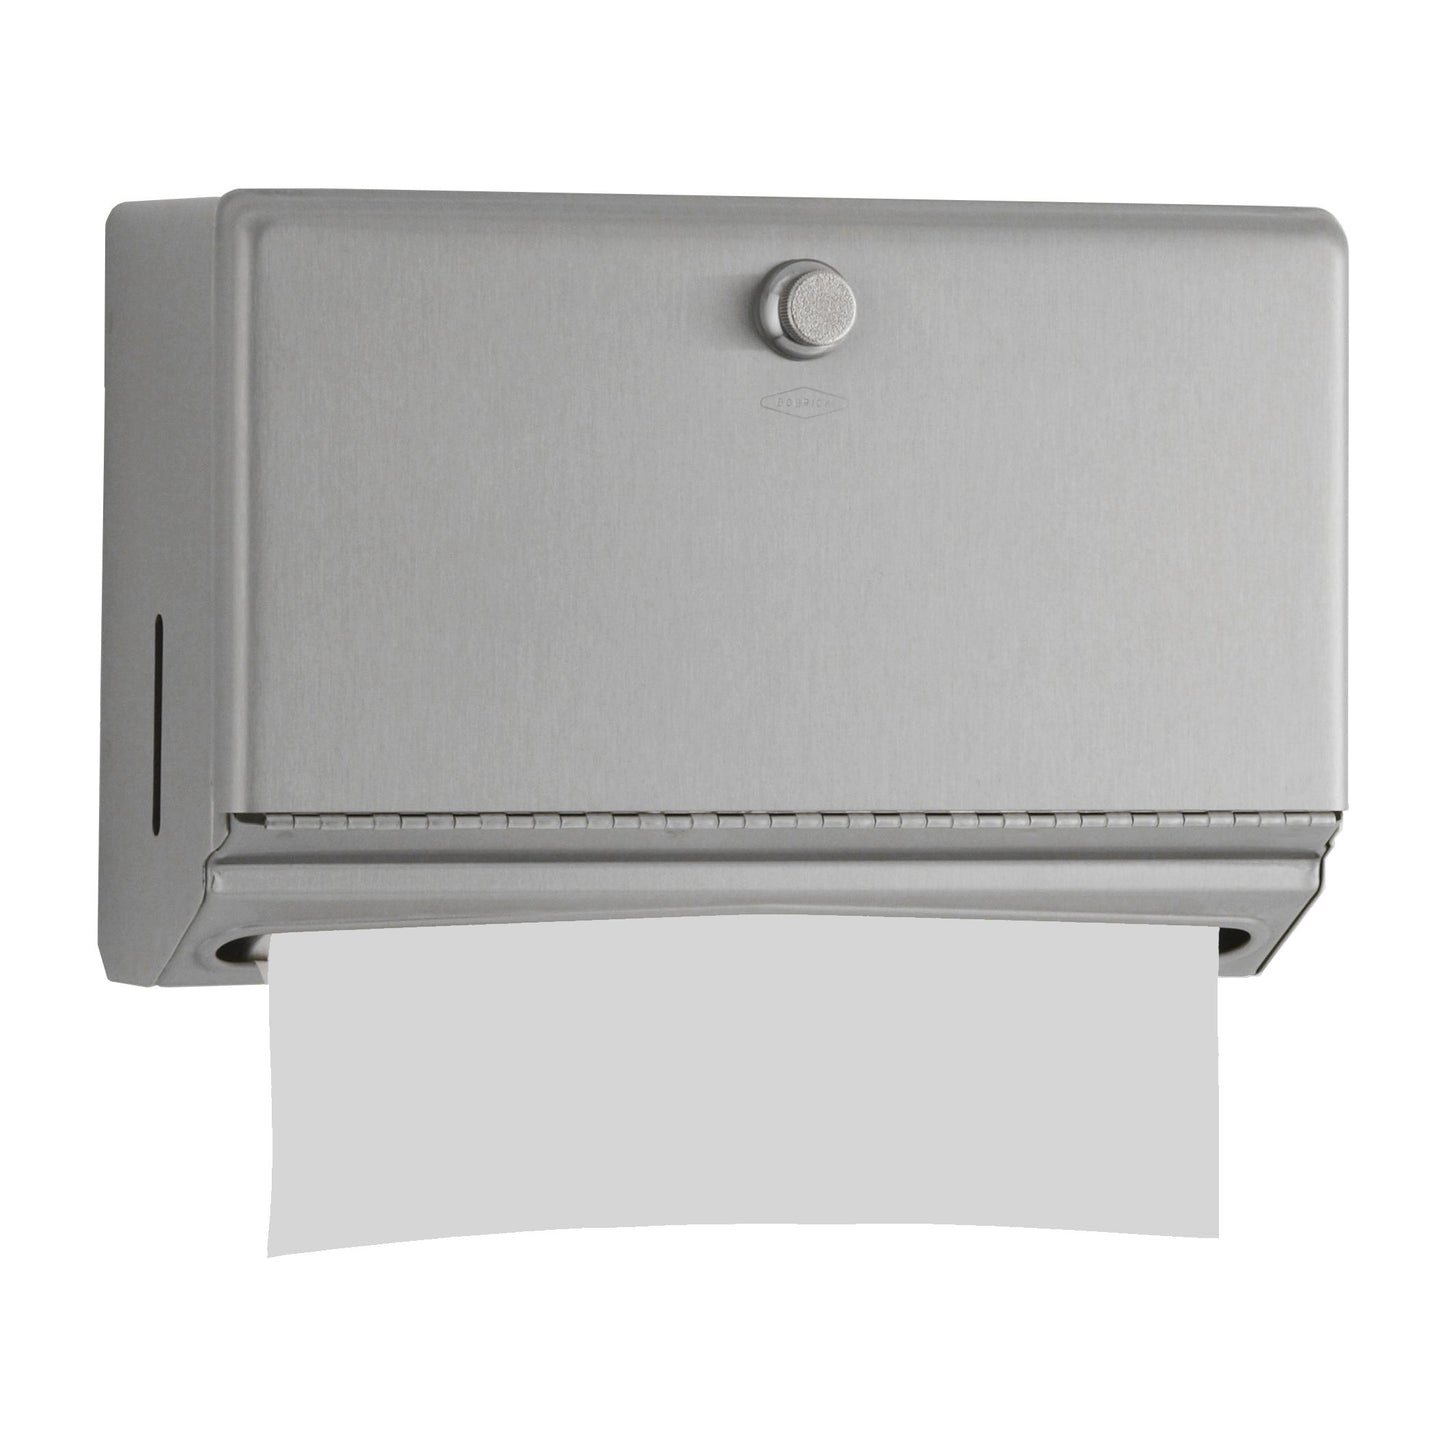 Bobrick 2621 - Classic Series Surface Mounted Paper Towel Dispenser in Satin Stainless Steel